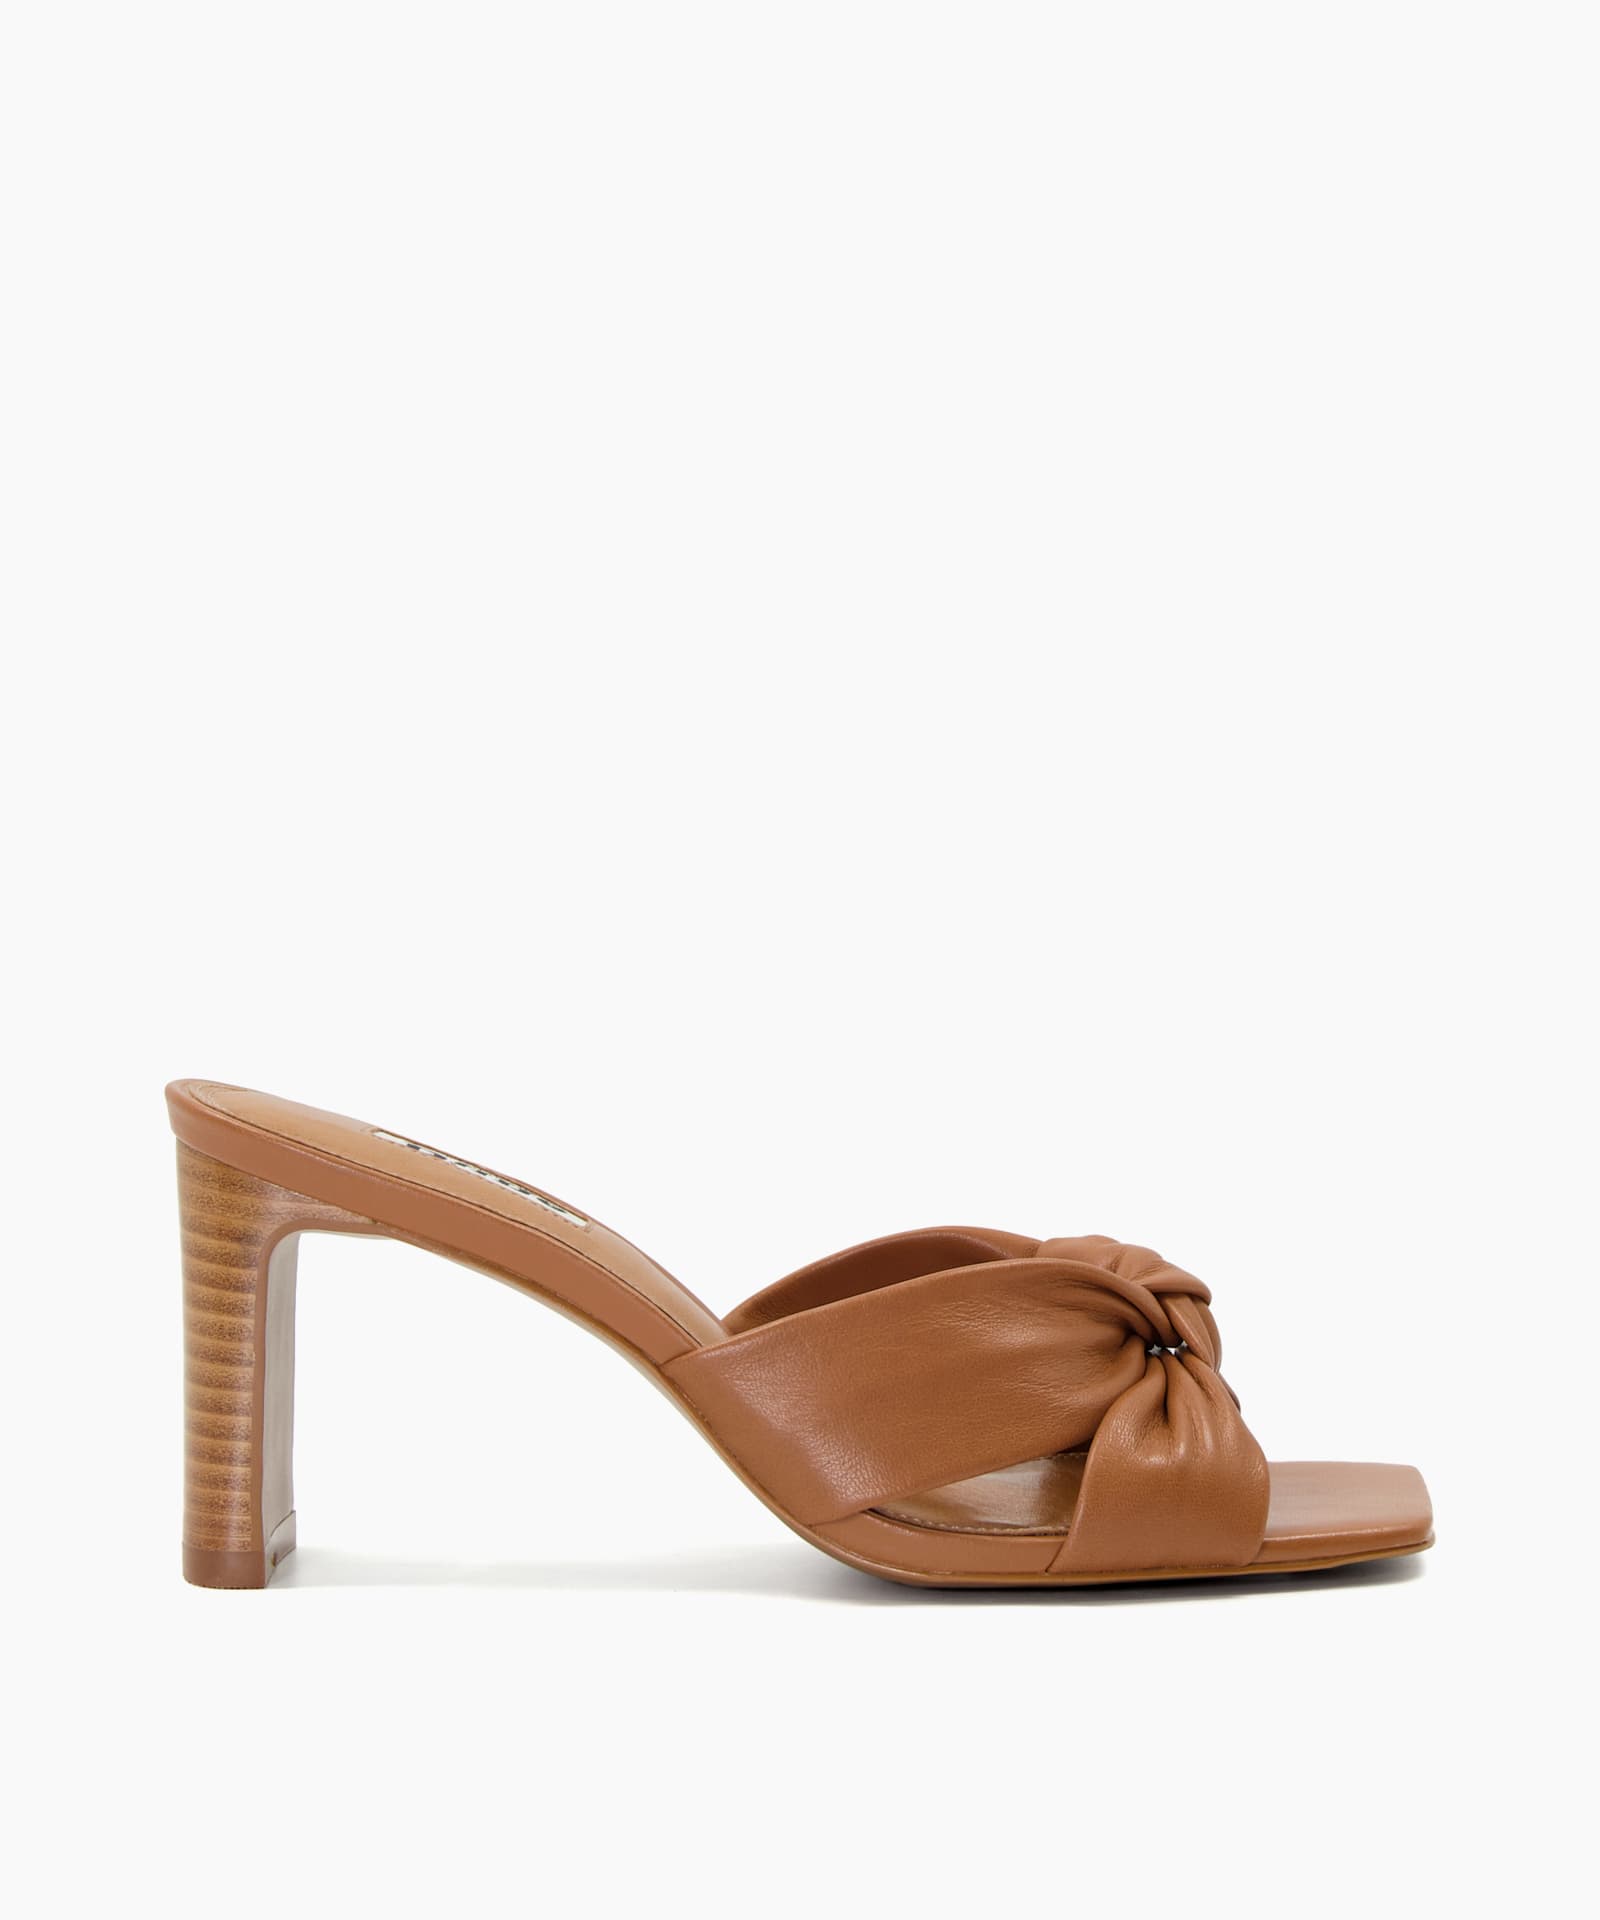 Dune London + Maize Knot-Detail Leather Open-Toe Mules in Tan